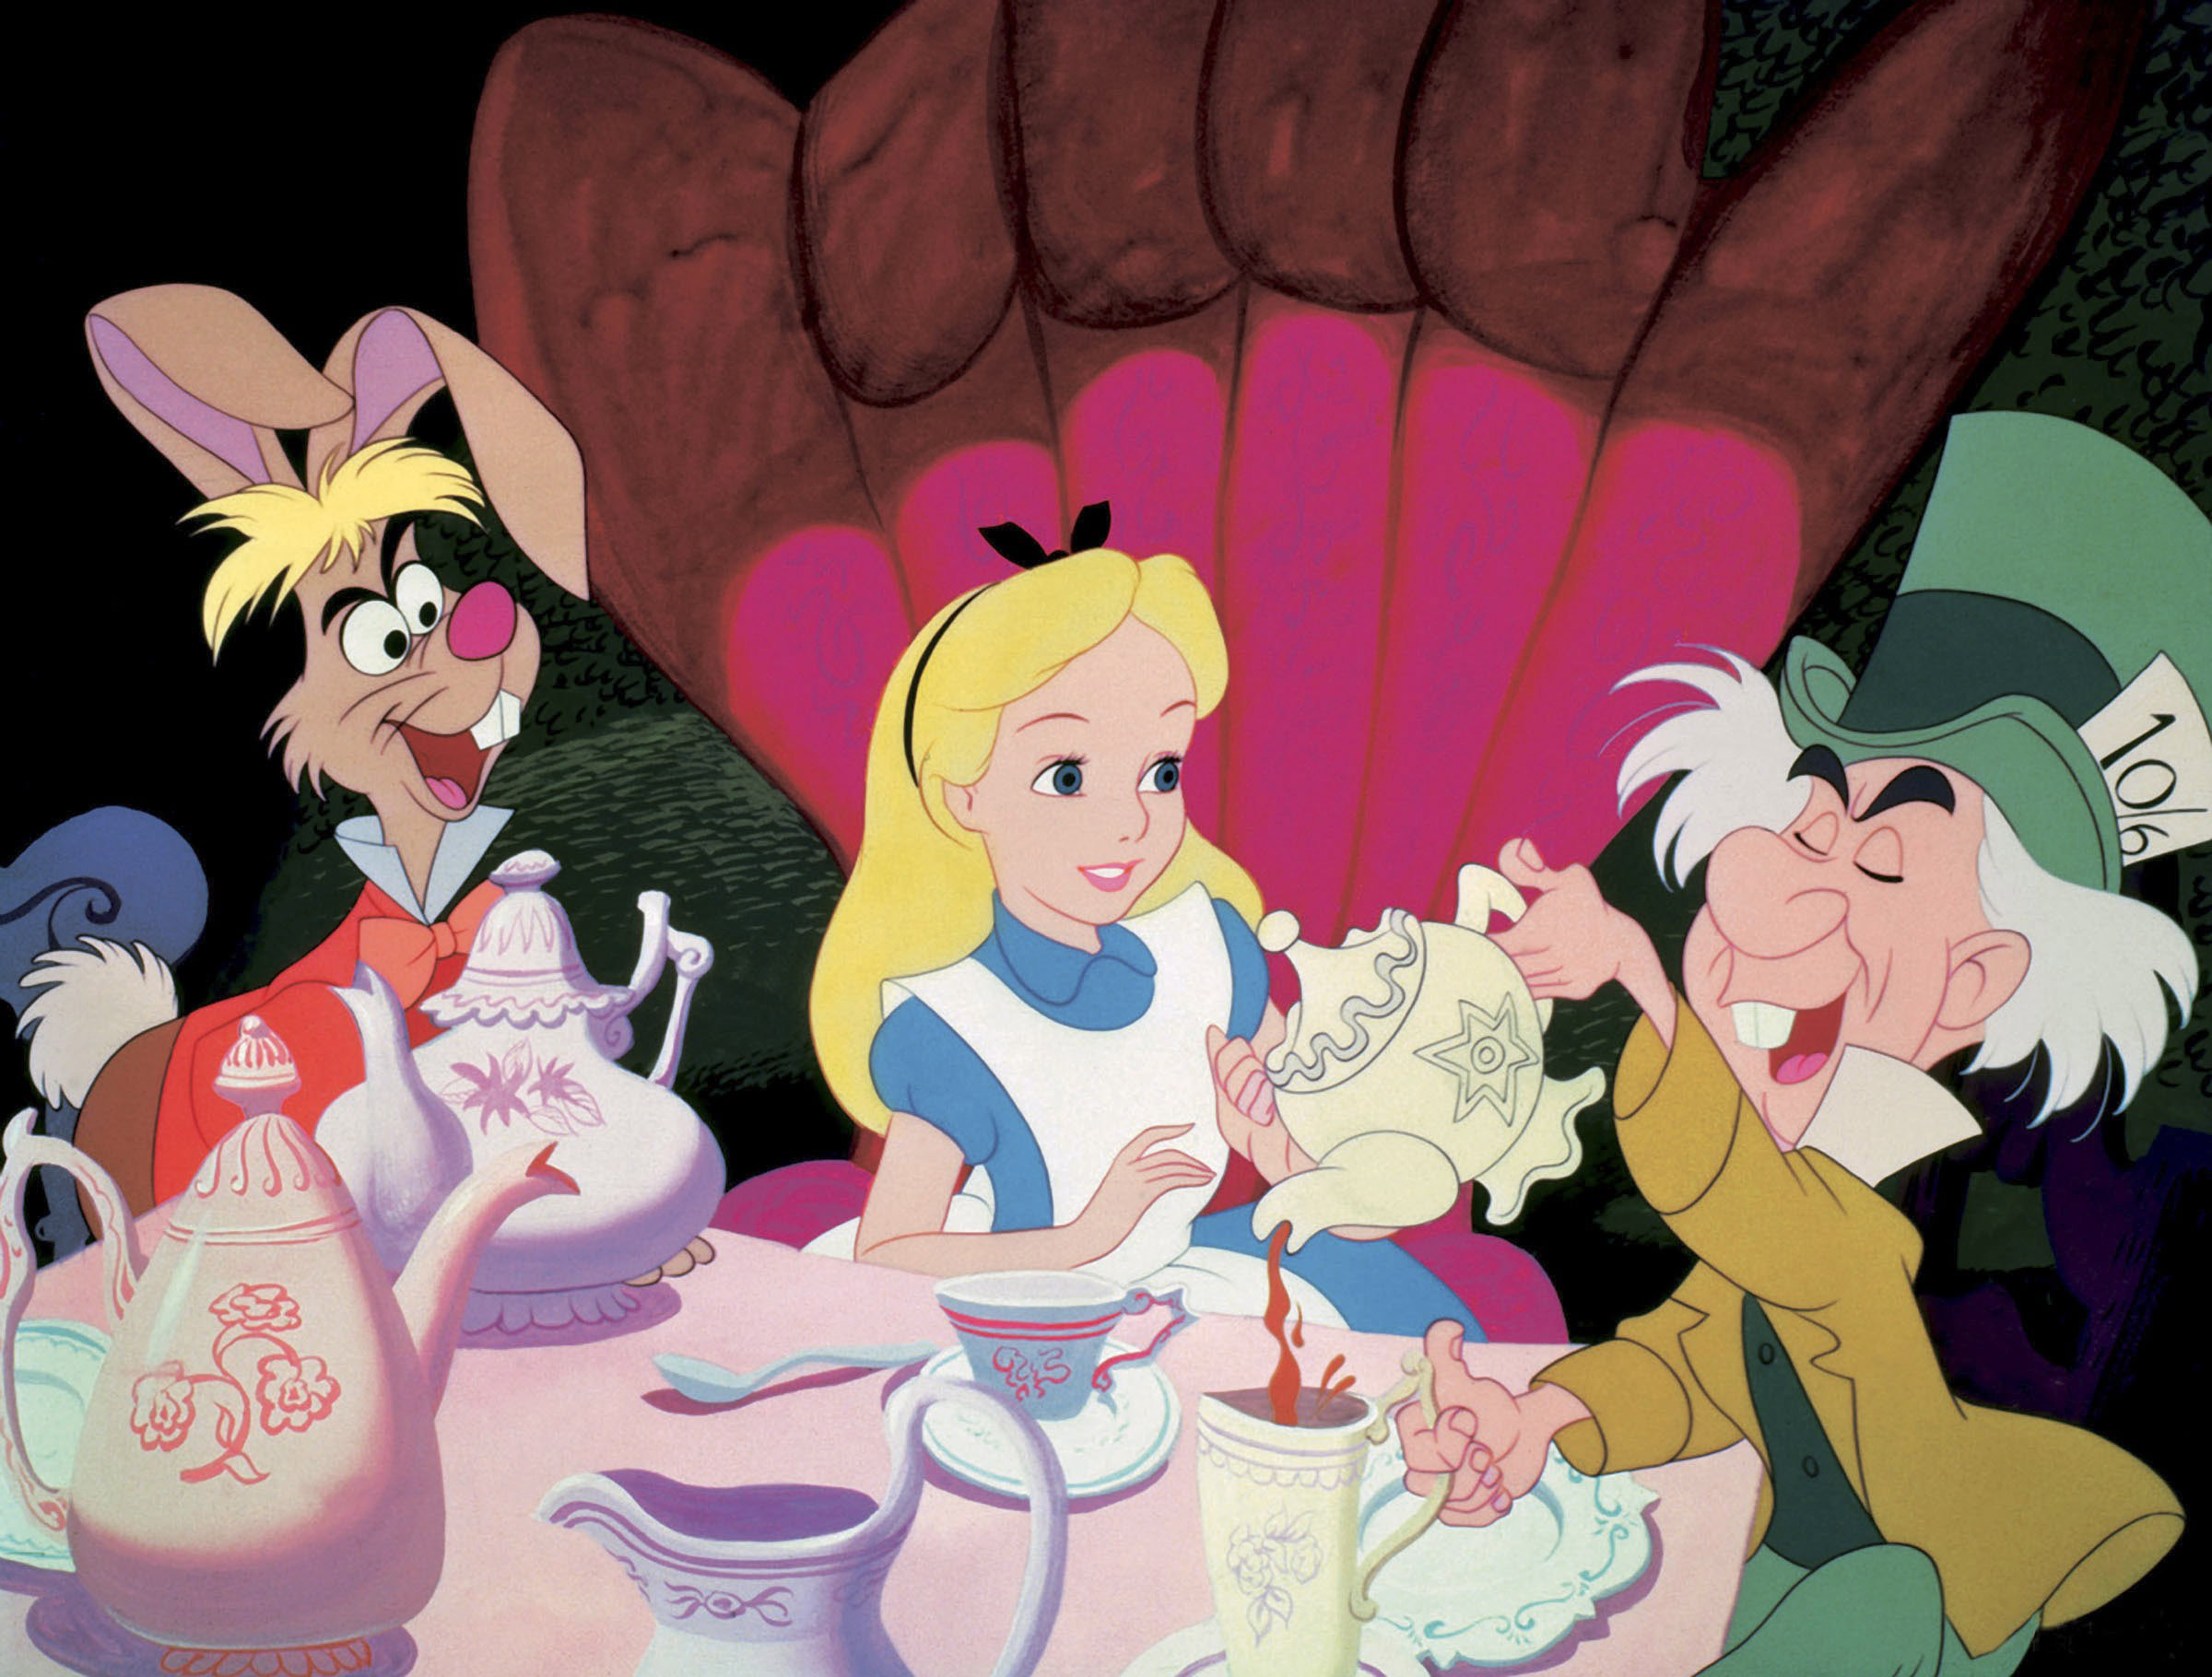 A scene from the Walt Disney film Alice in Wonderland with March Hare, Alice and the Mad Hatter, 1951.